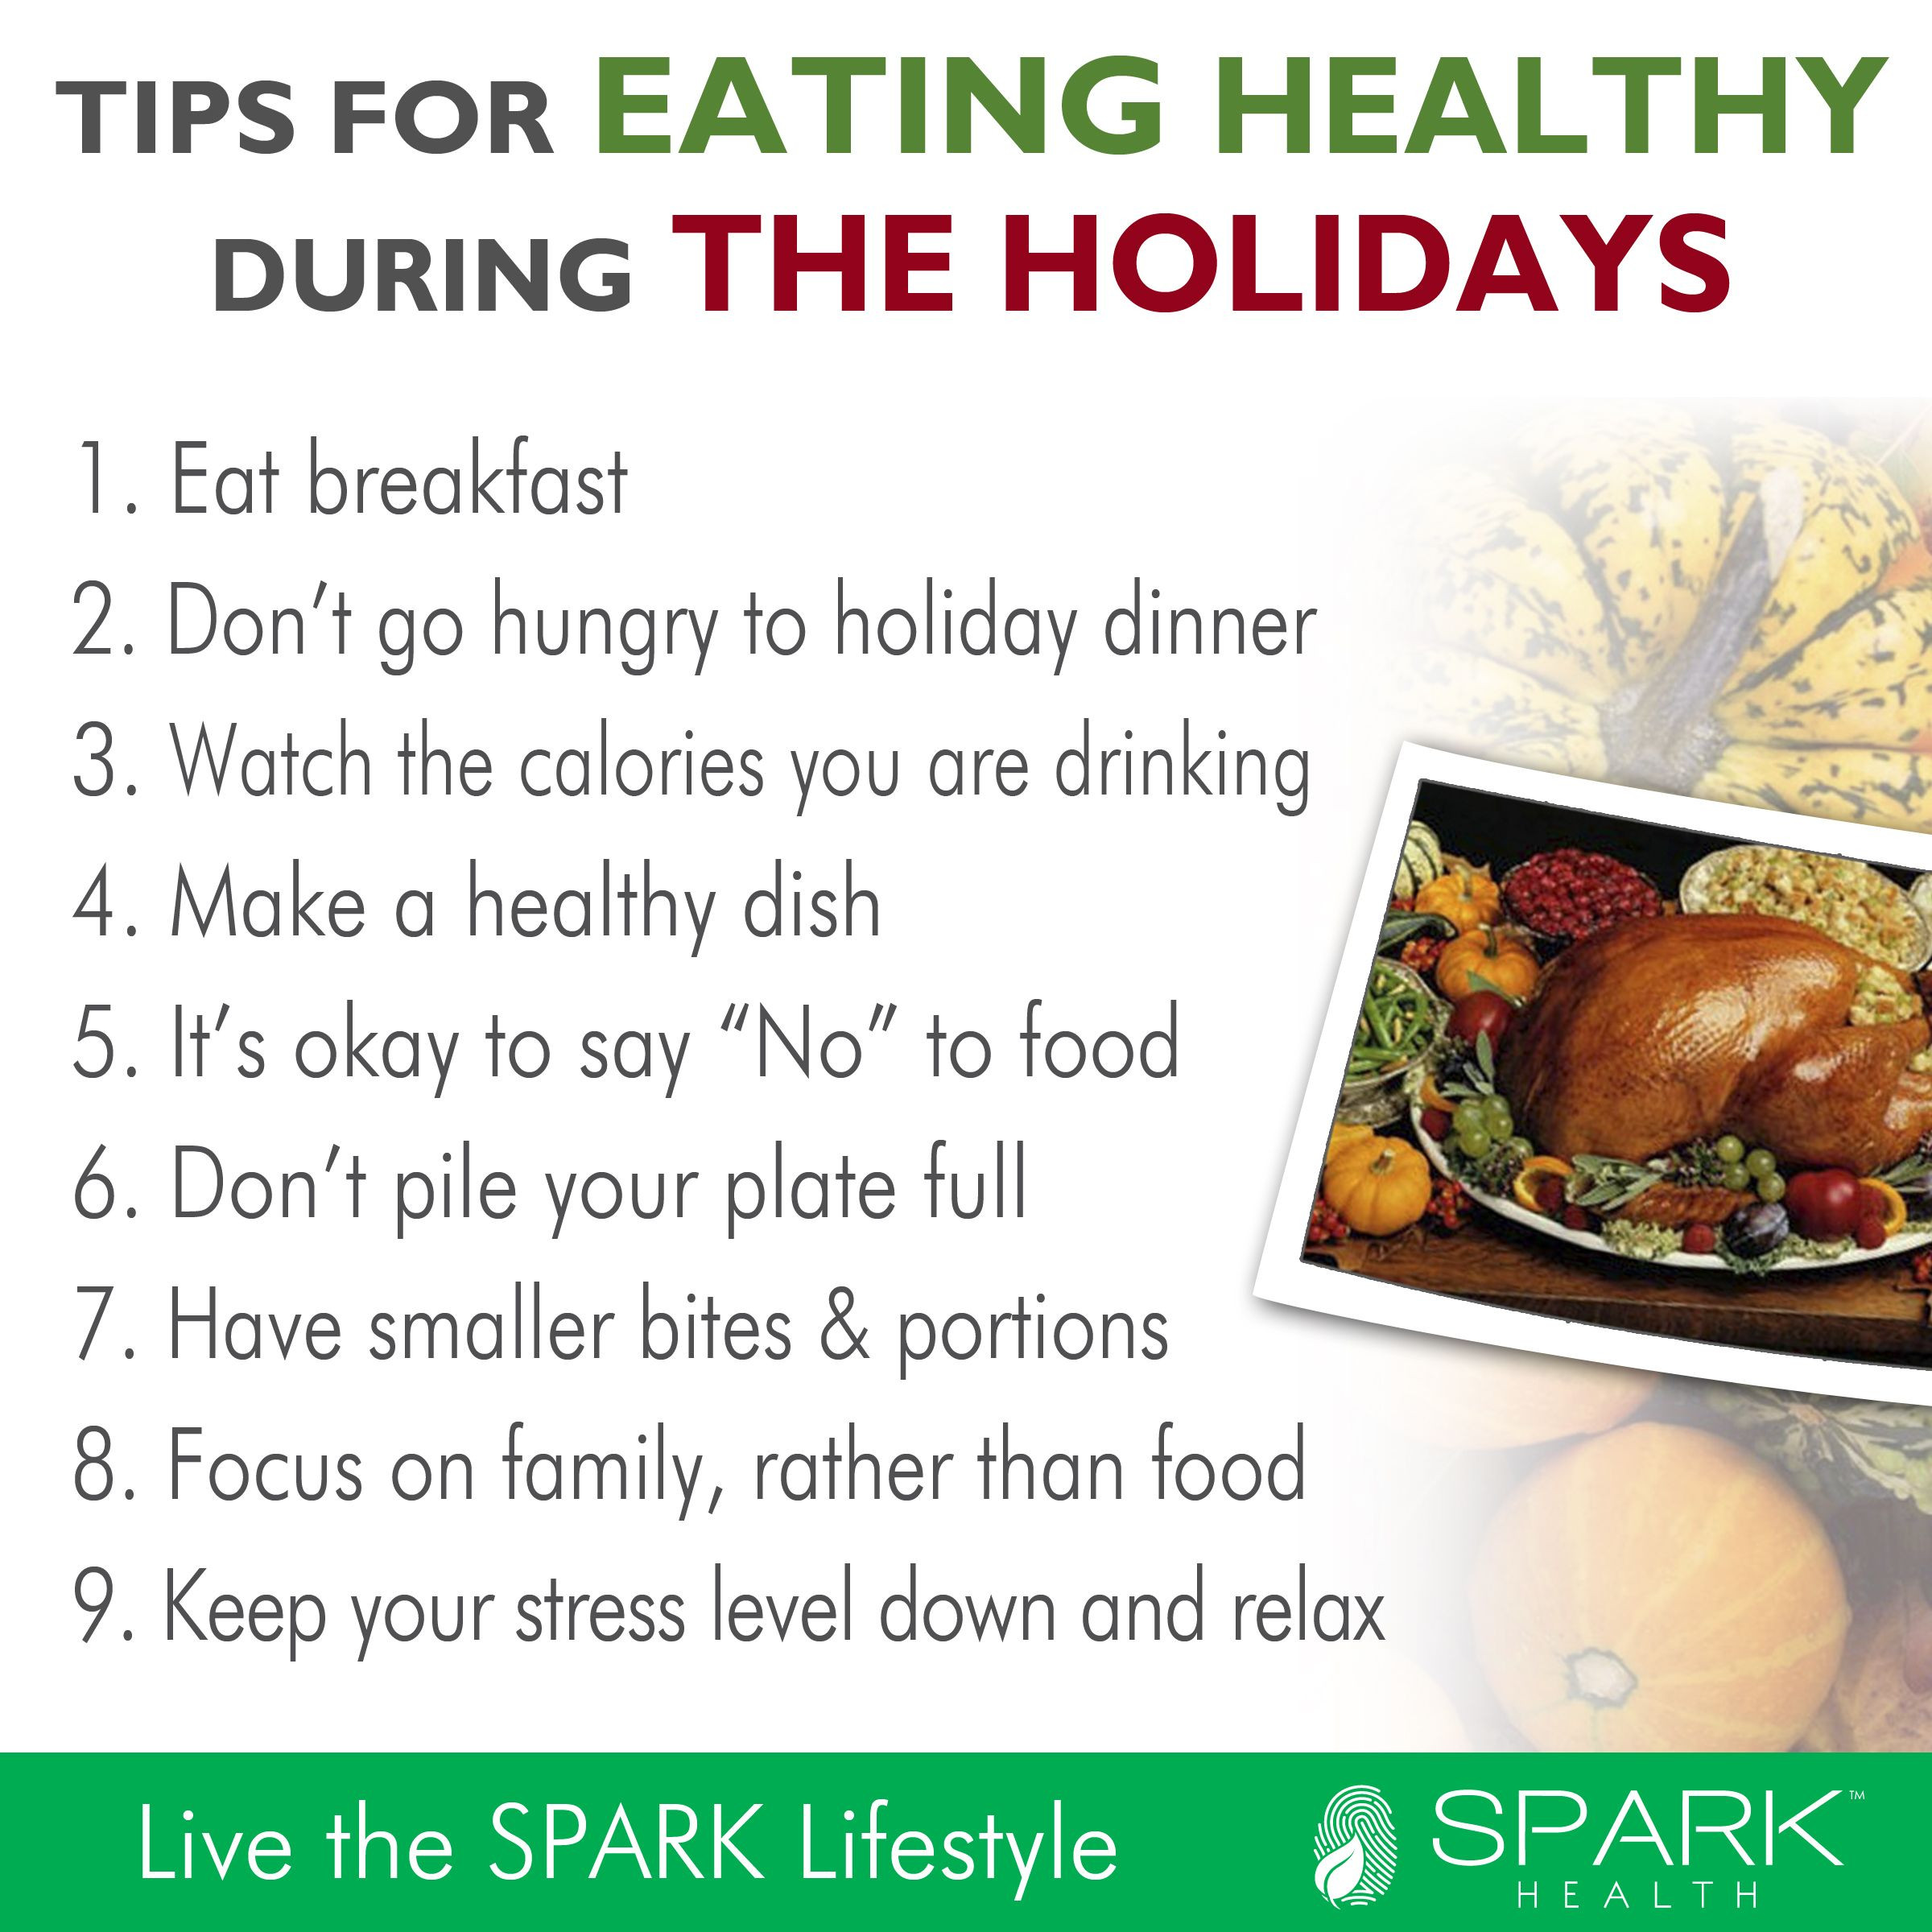 Thanksgiving Tips For Healthy Eating
 Healthy holiday eating tips for Thanksgiving and Christmas